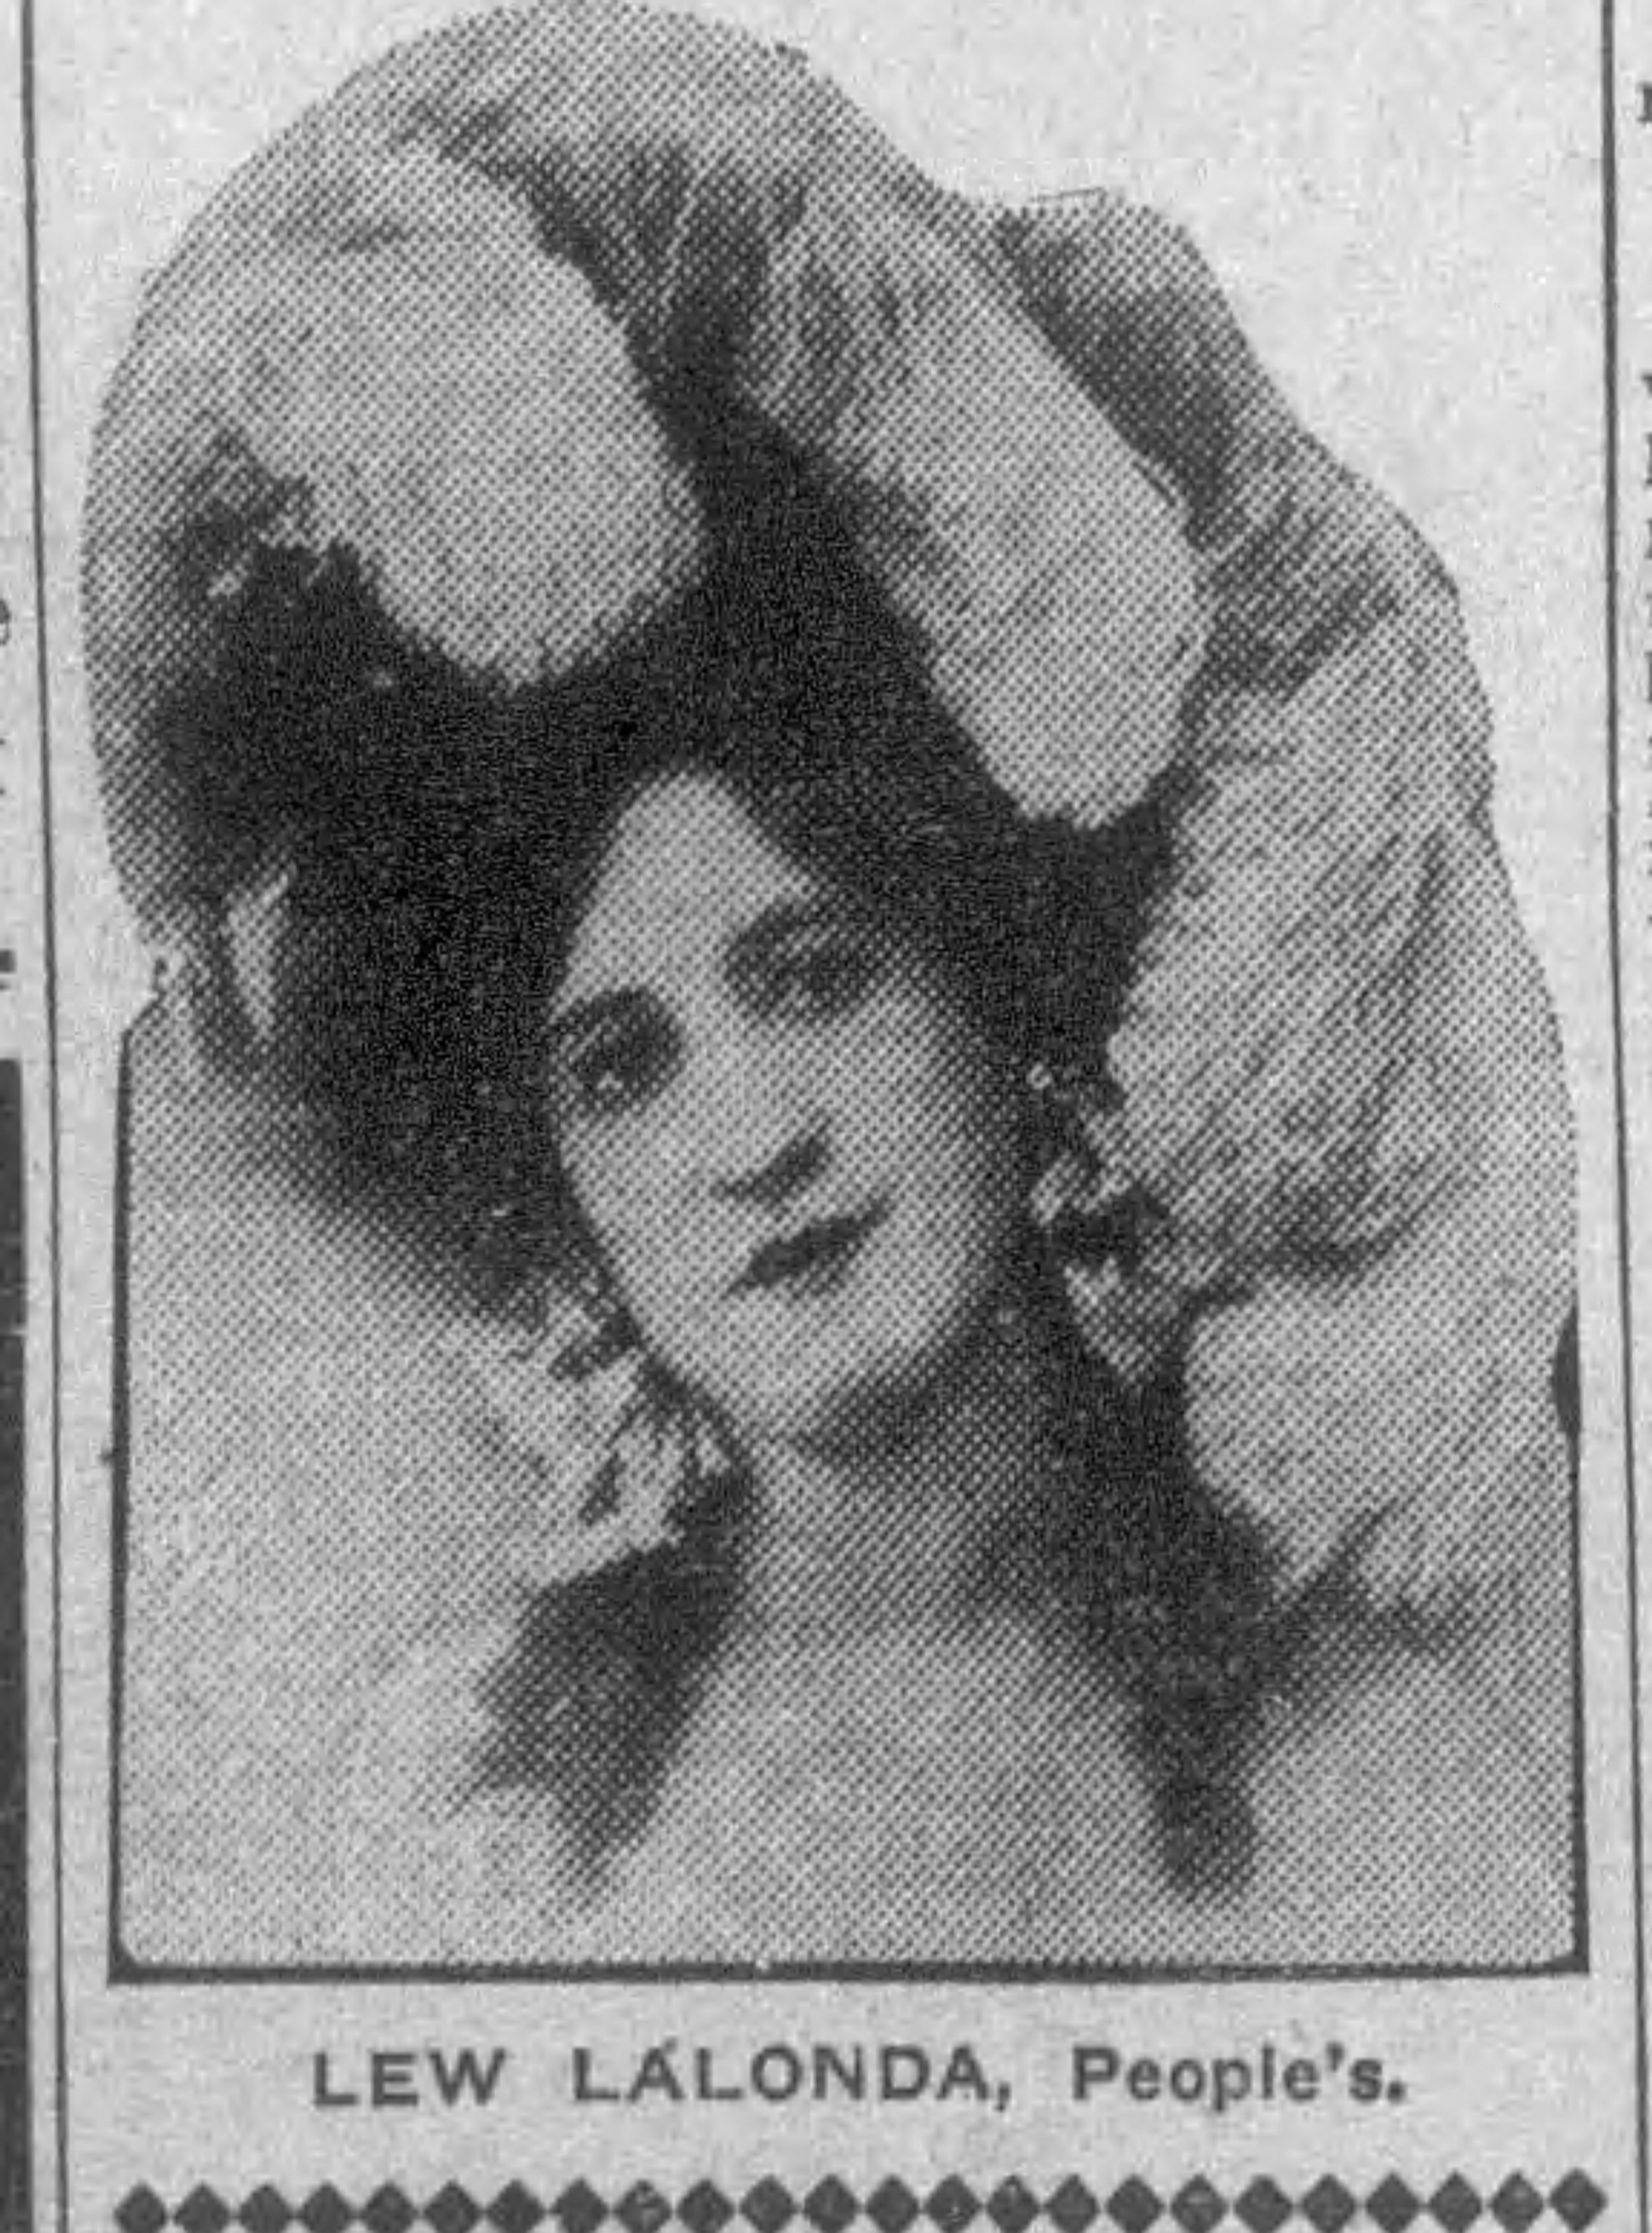  Newspaper clippings advertising Yarick &amp; Lalonda at the Grand Theater in Bellingham, 1905.  